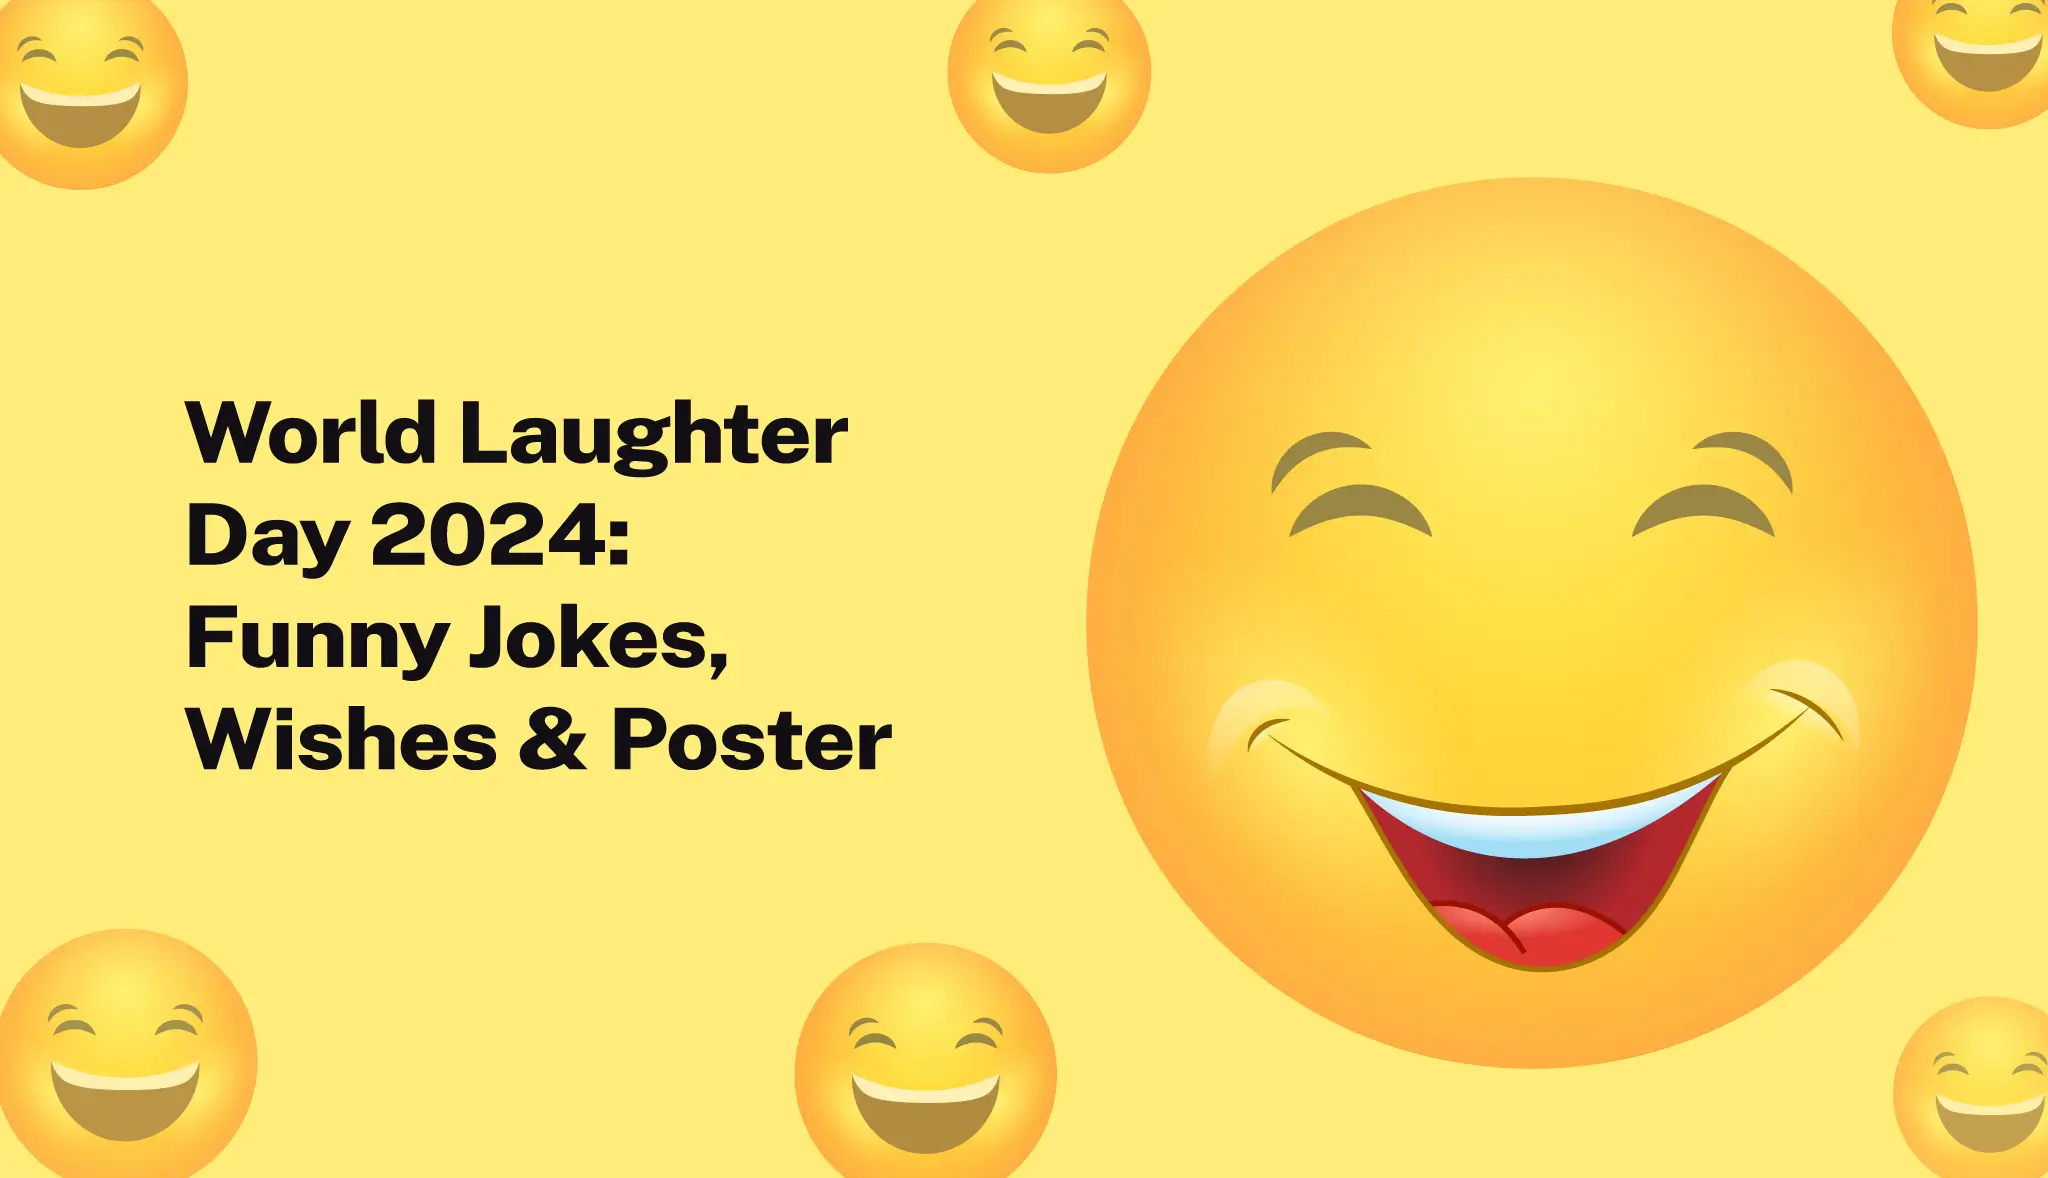 World Laughter Day 2024: Funny Jokes, Wishes & Posters - Postive